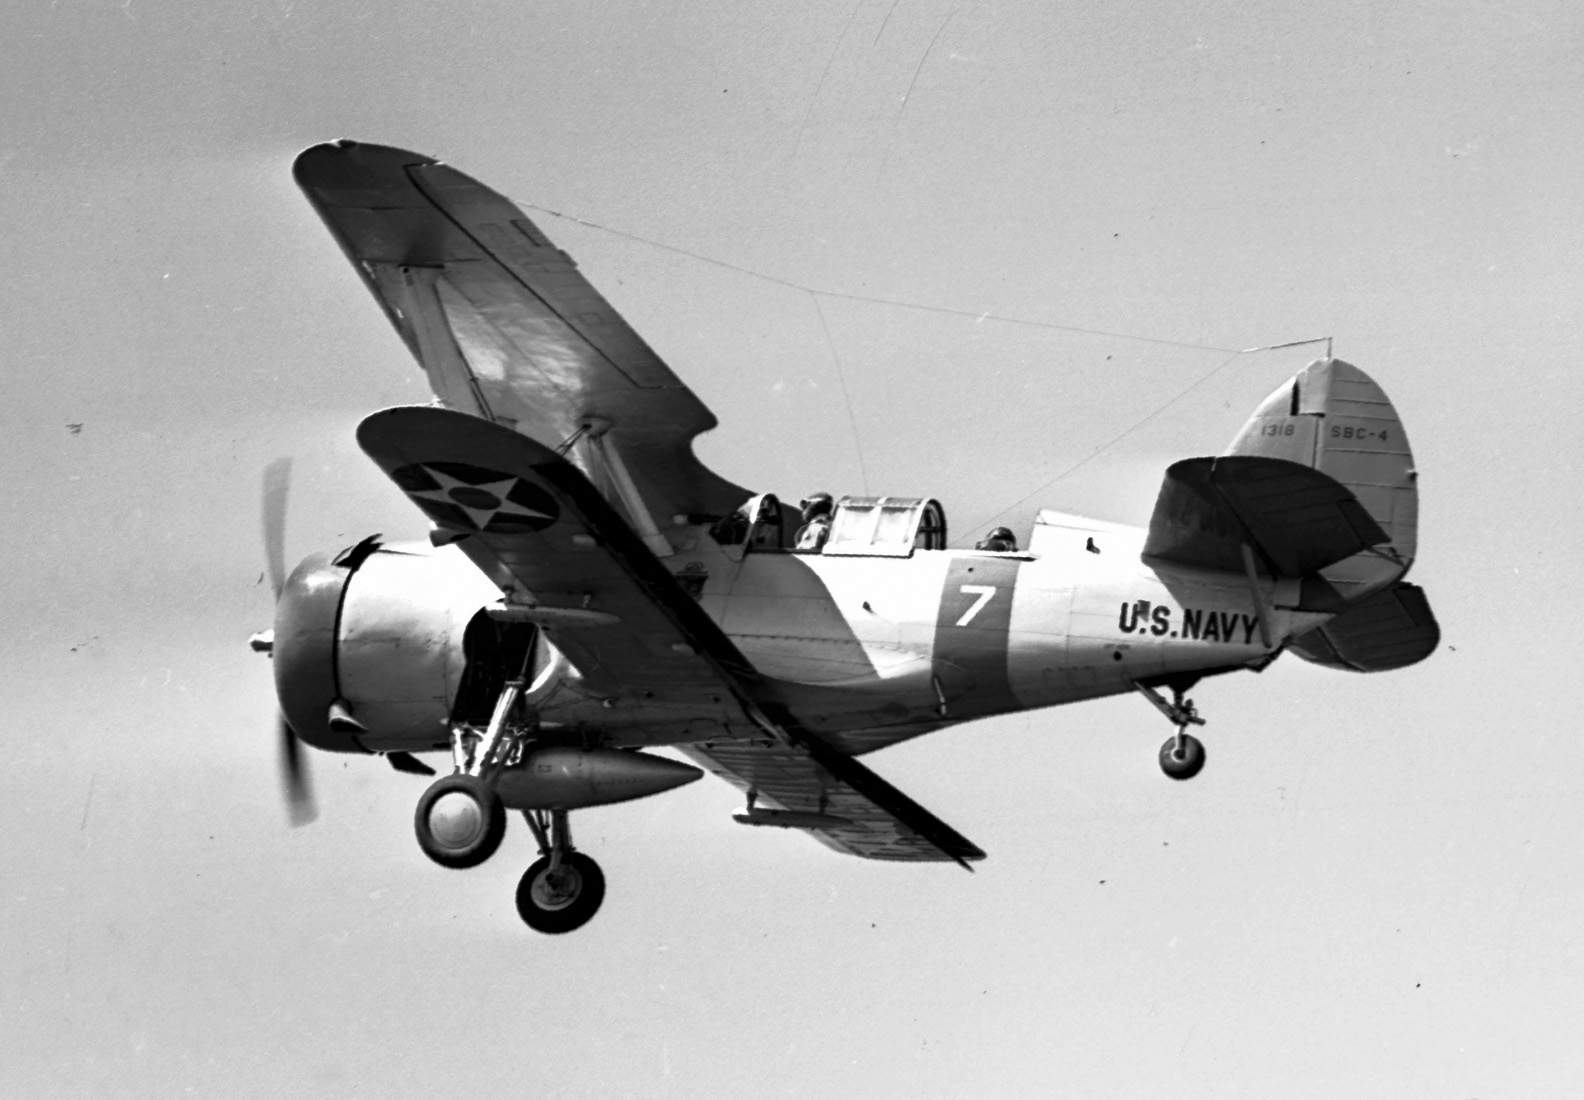 A Curtiss SBC-4 scout-bomber, the last biplane operated by the U.S. military, was also known as the Helldiver. It was obsolete even before the war began. 